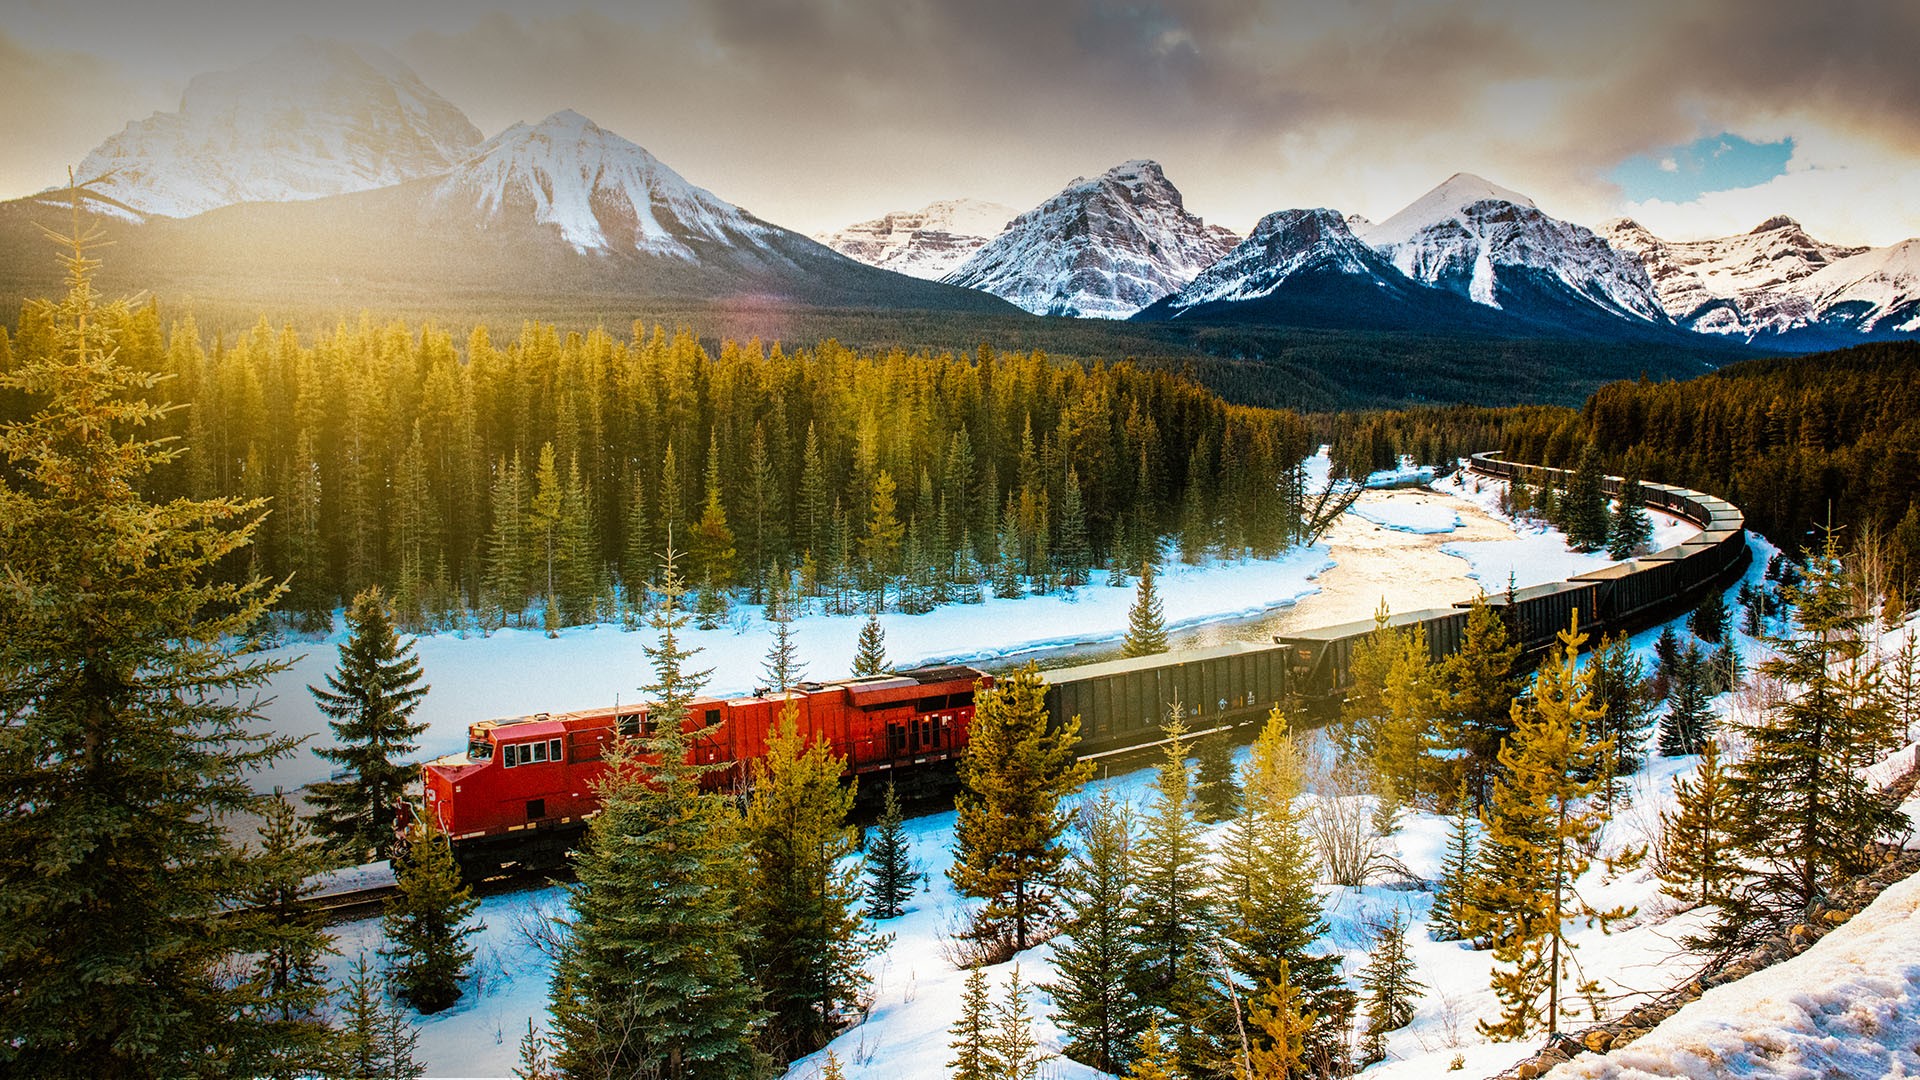 Canadian Pacific Railway train in Banff National Park in winter